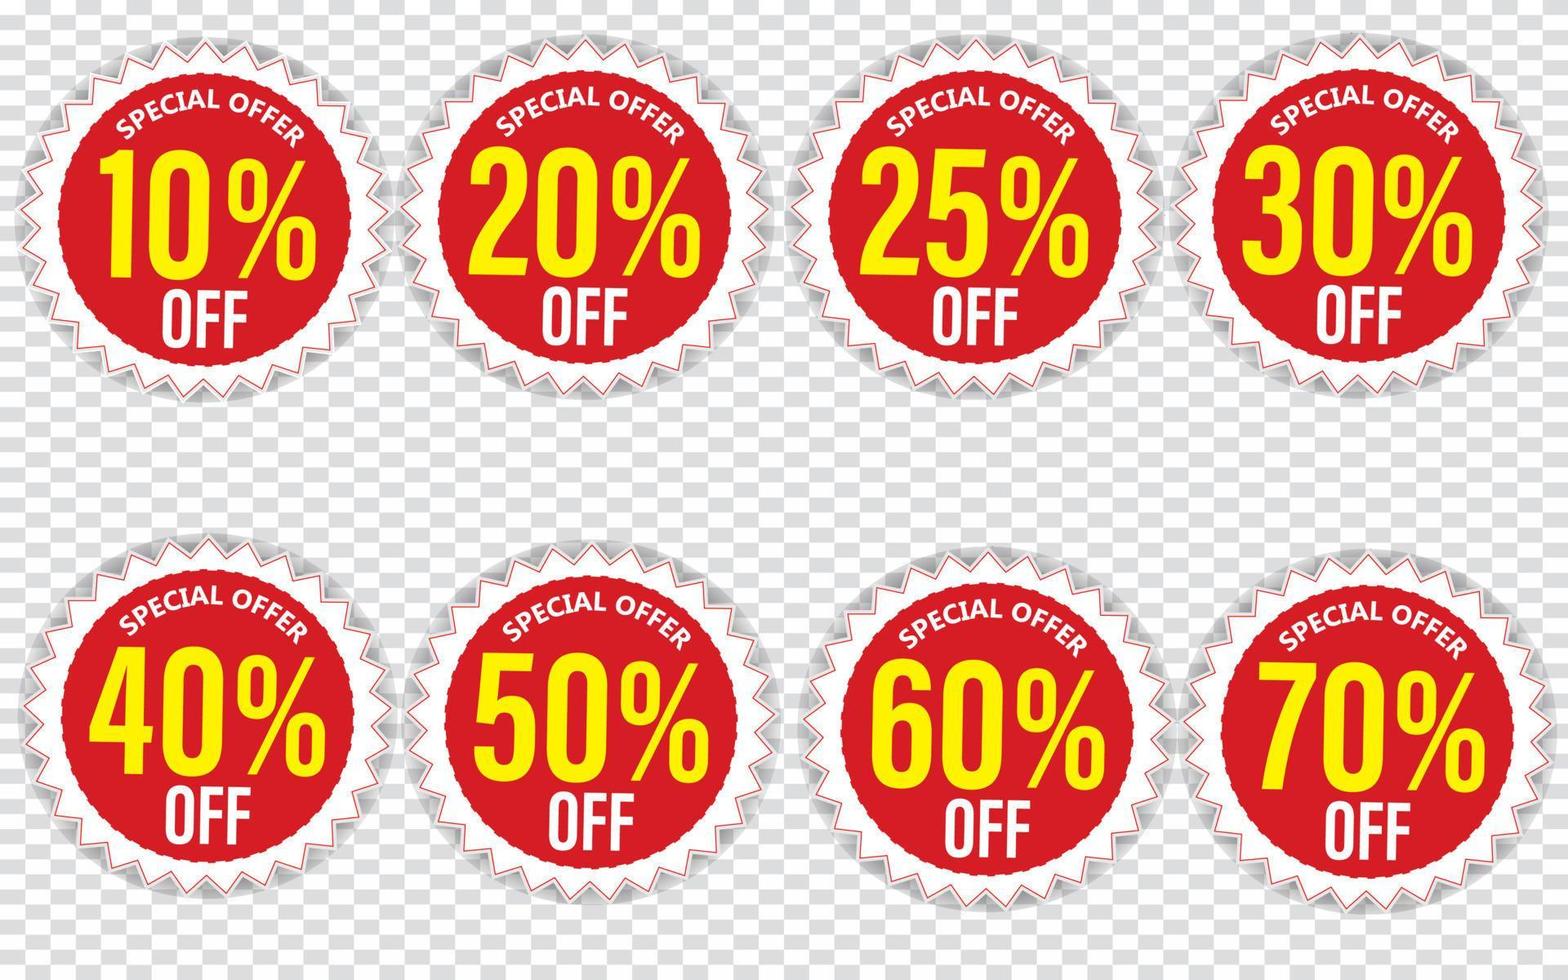 Discount stickers set for shop, retail, promotion. 10, 20, 25, 30, 40, 50, 60, 70 percentage off vector